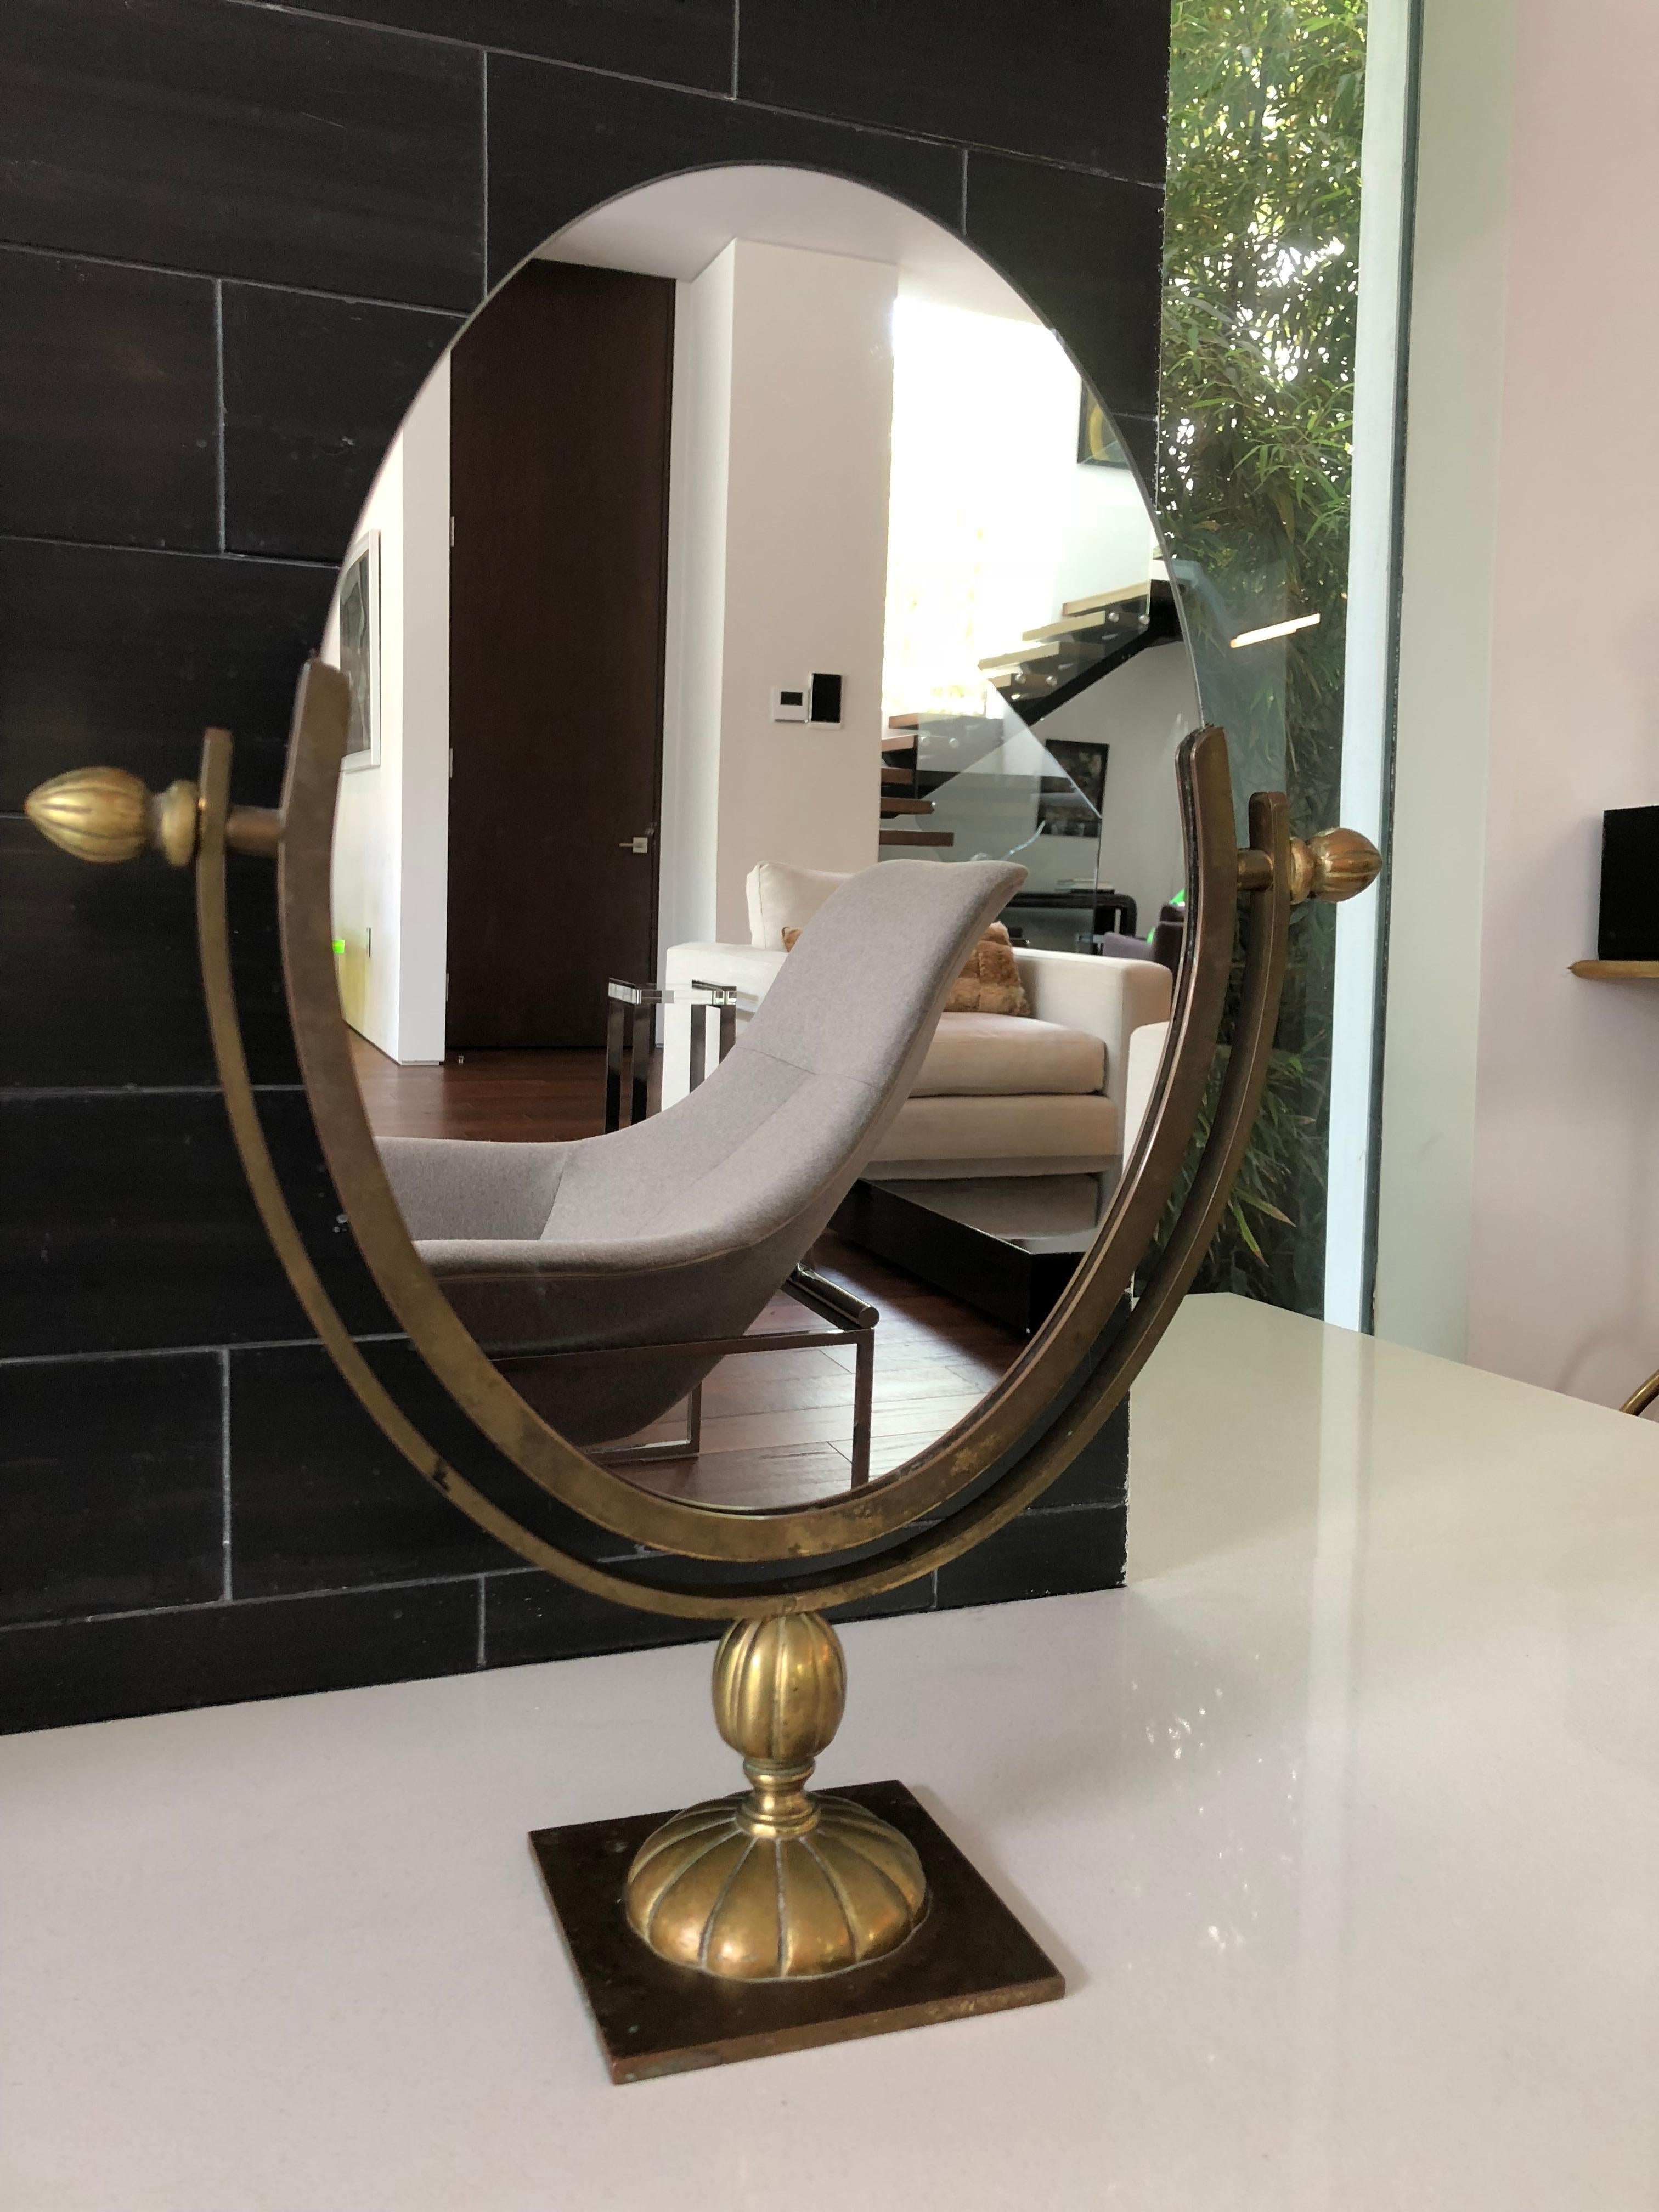 Beautiful oval mirror designed and manufactured by Charles Hollis Jones in the 1960s. The mirror has an antique brass finished frame and base, the mirror is double sided and it can be flipped to be used on either side.
Measures: 19 1/2